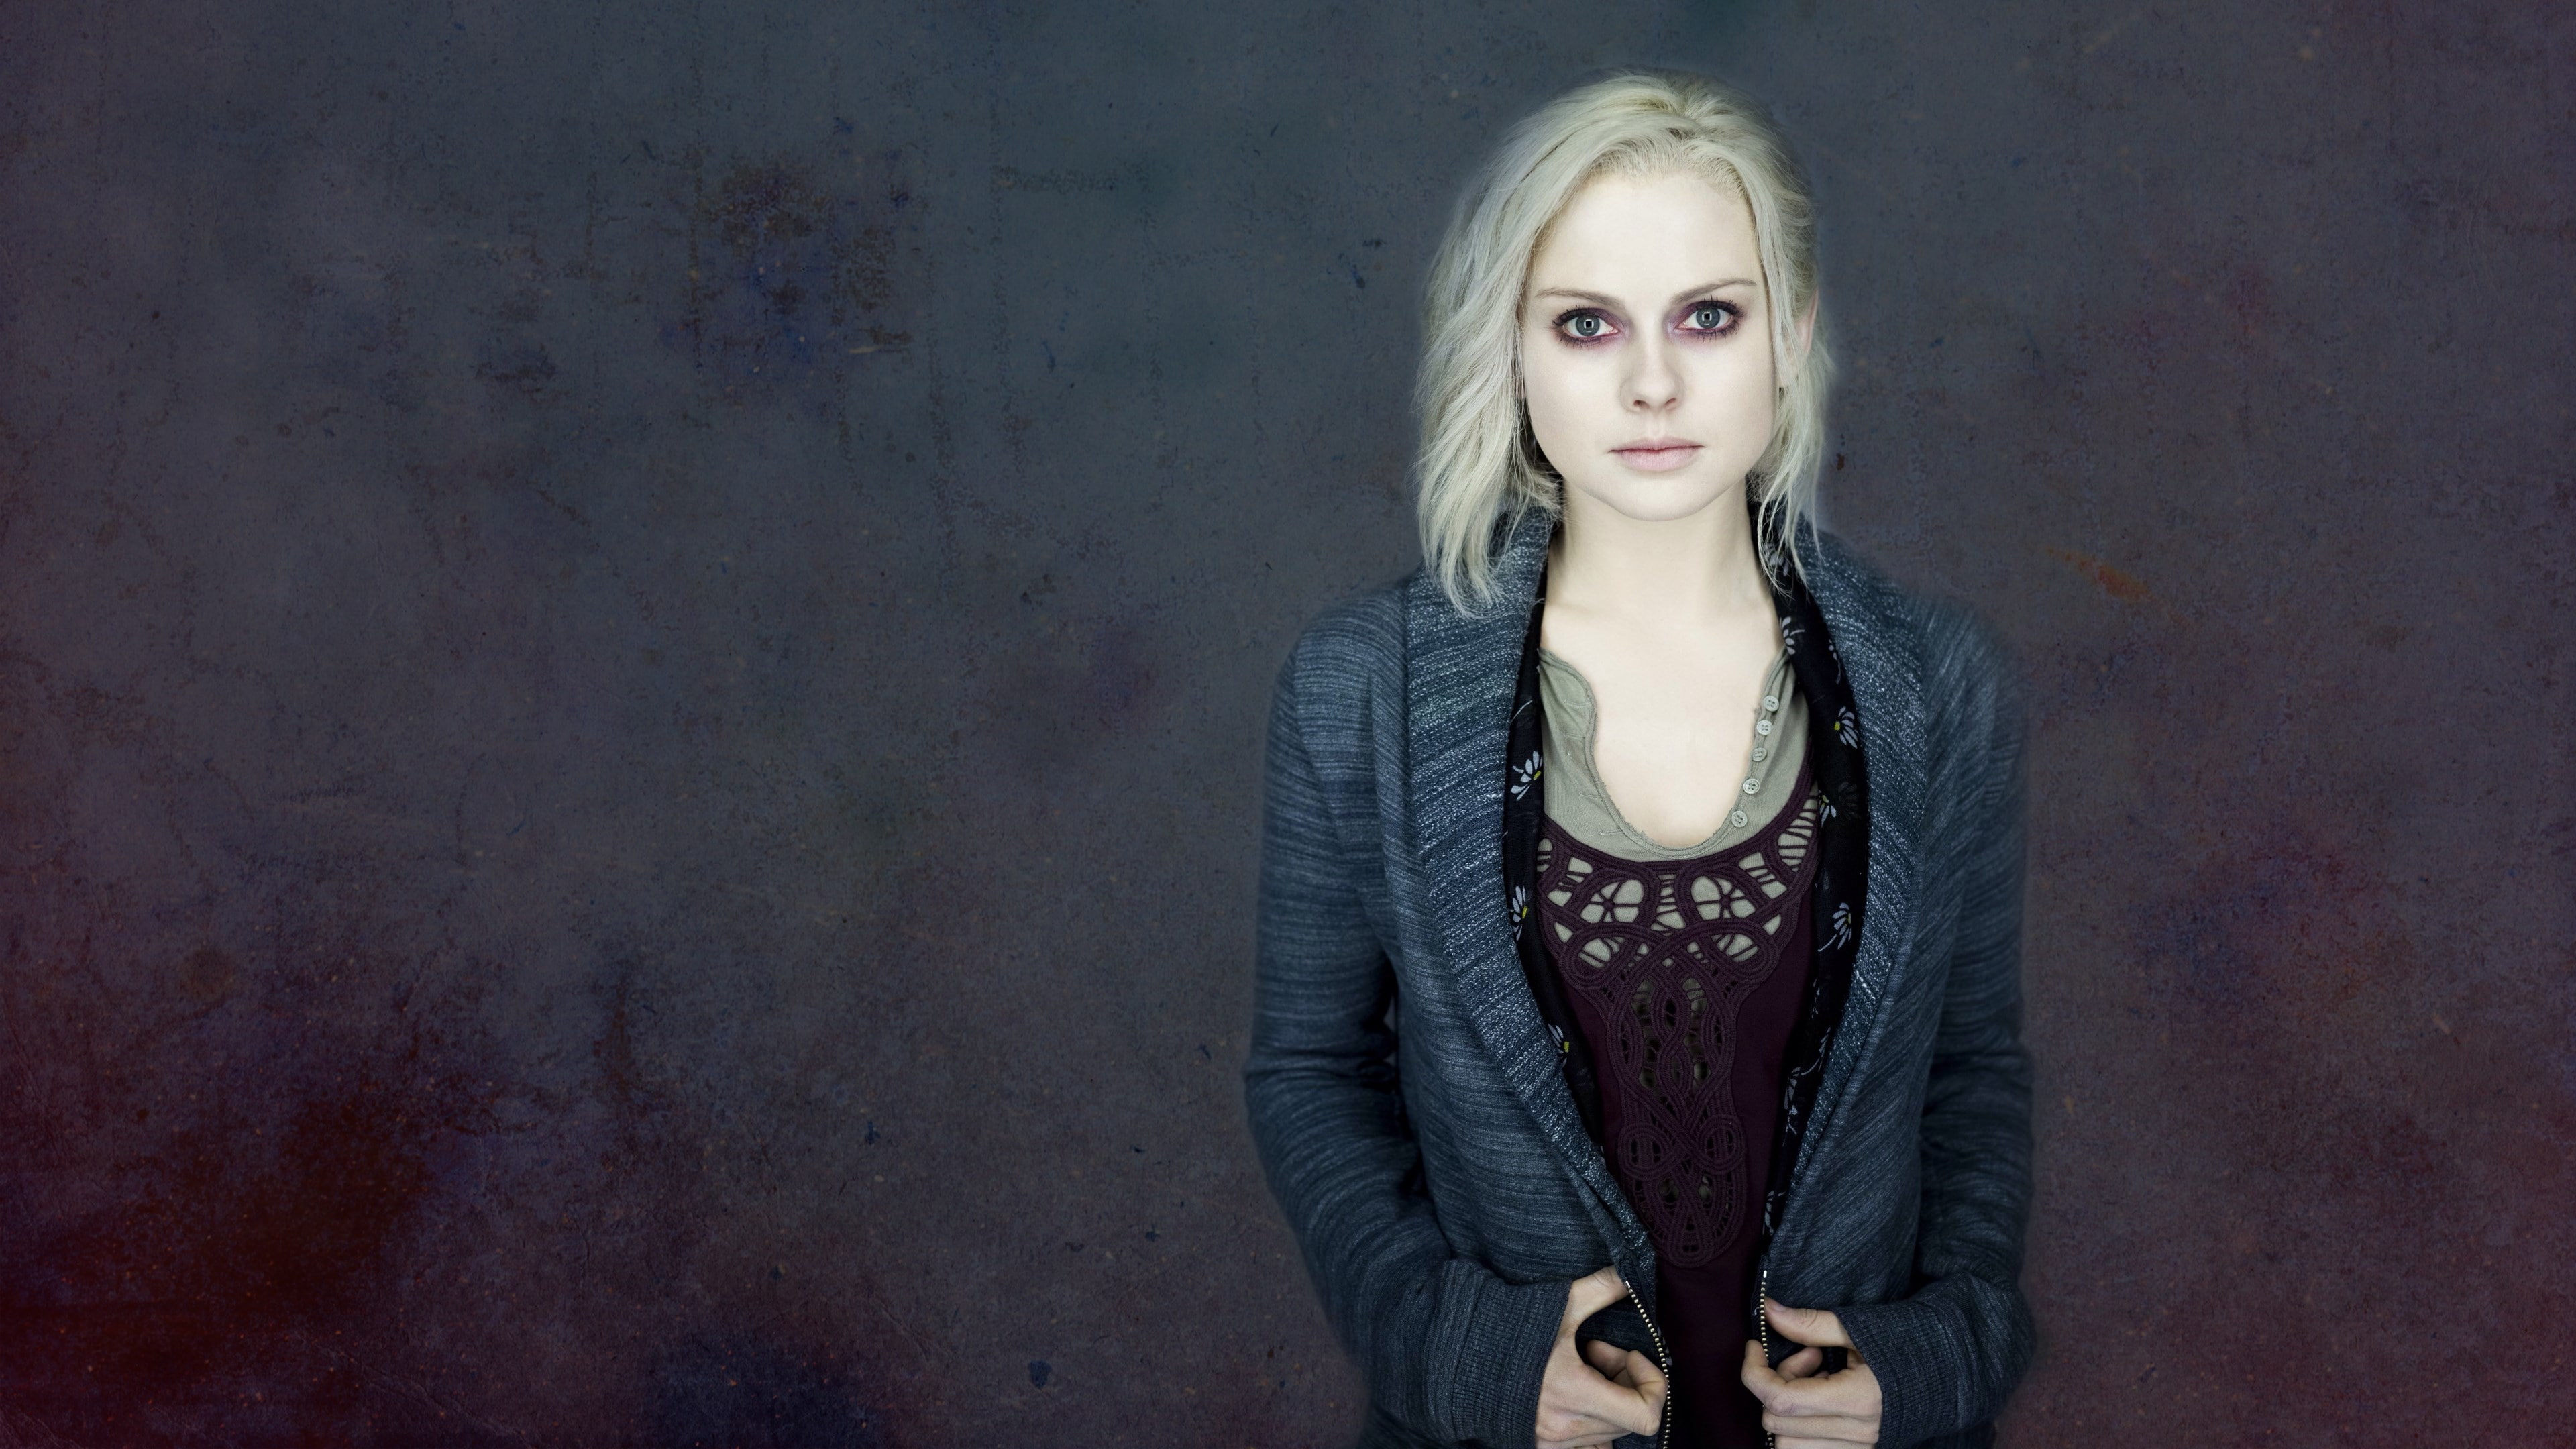 izombie, young adult, looking at camera, portrait, one person